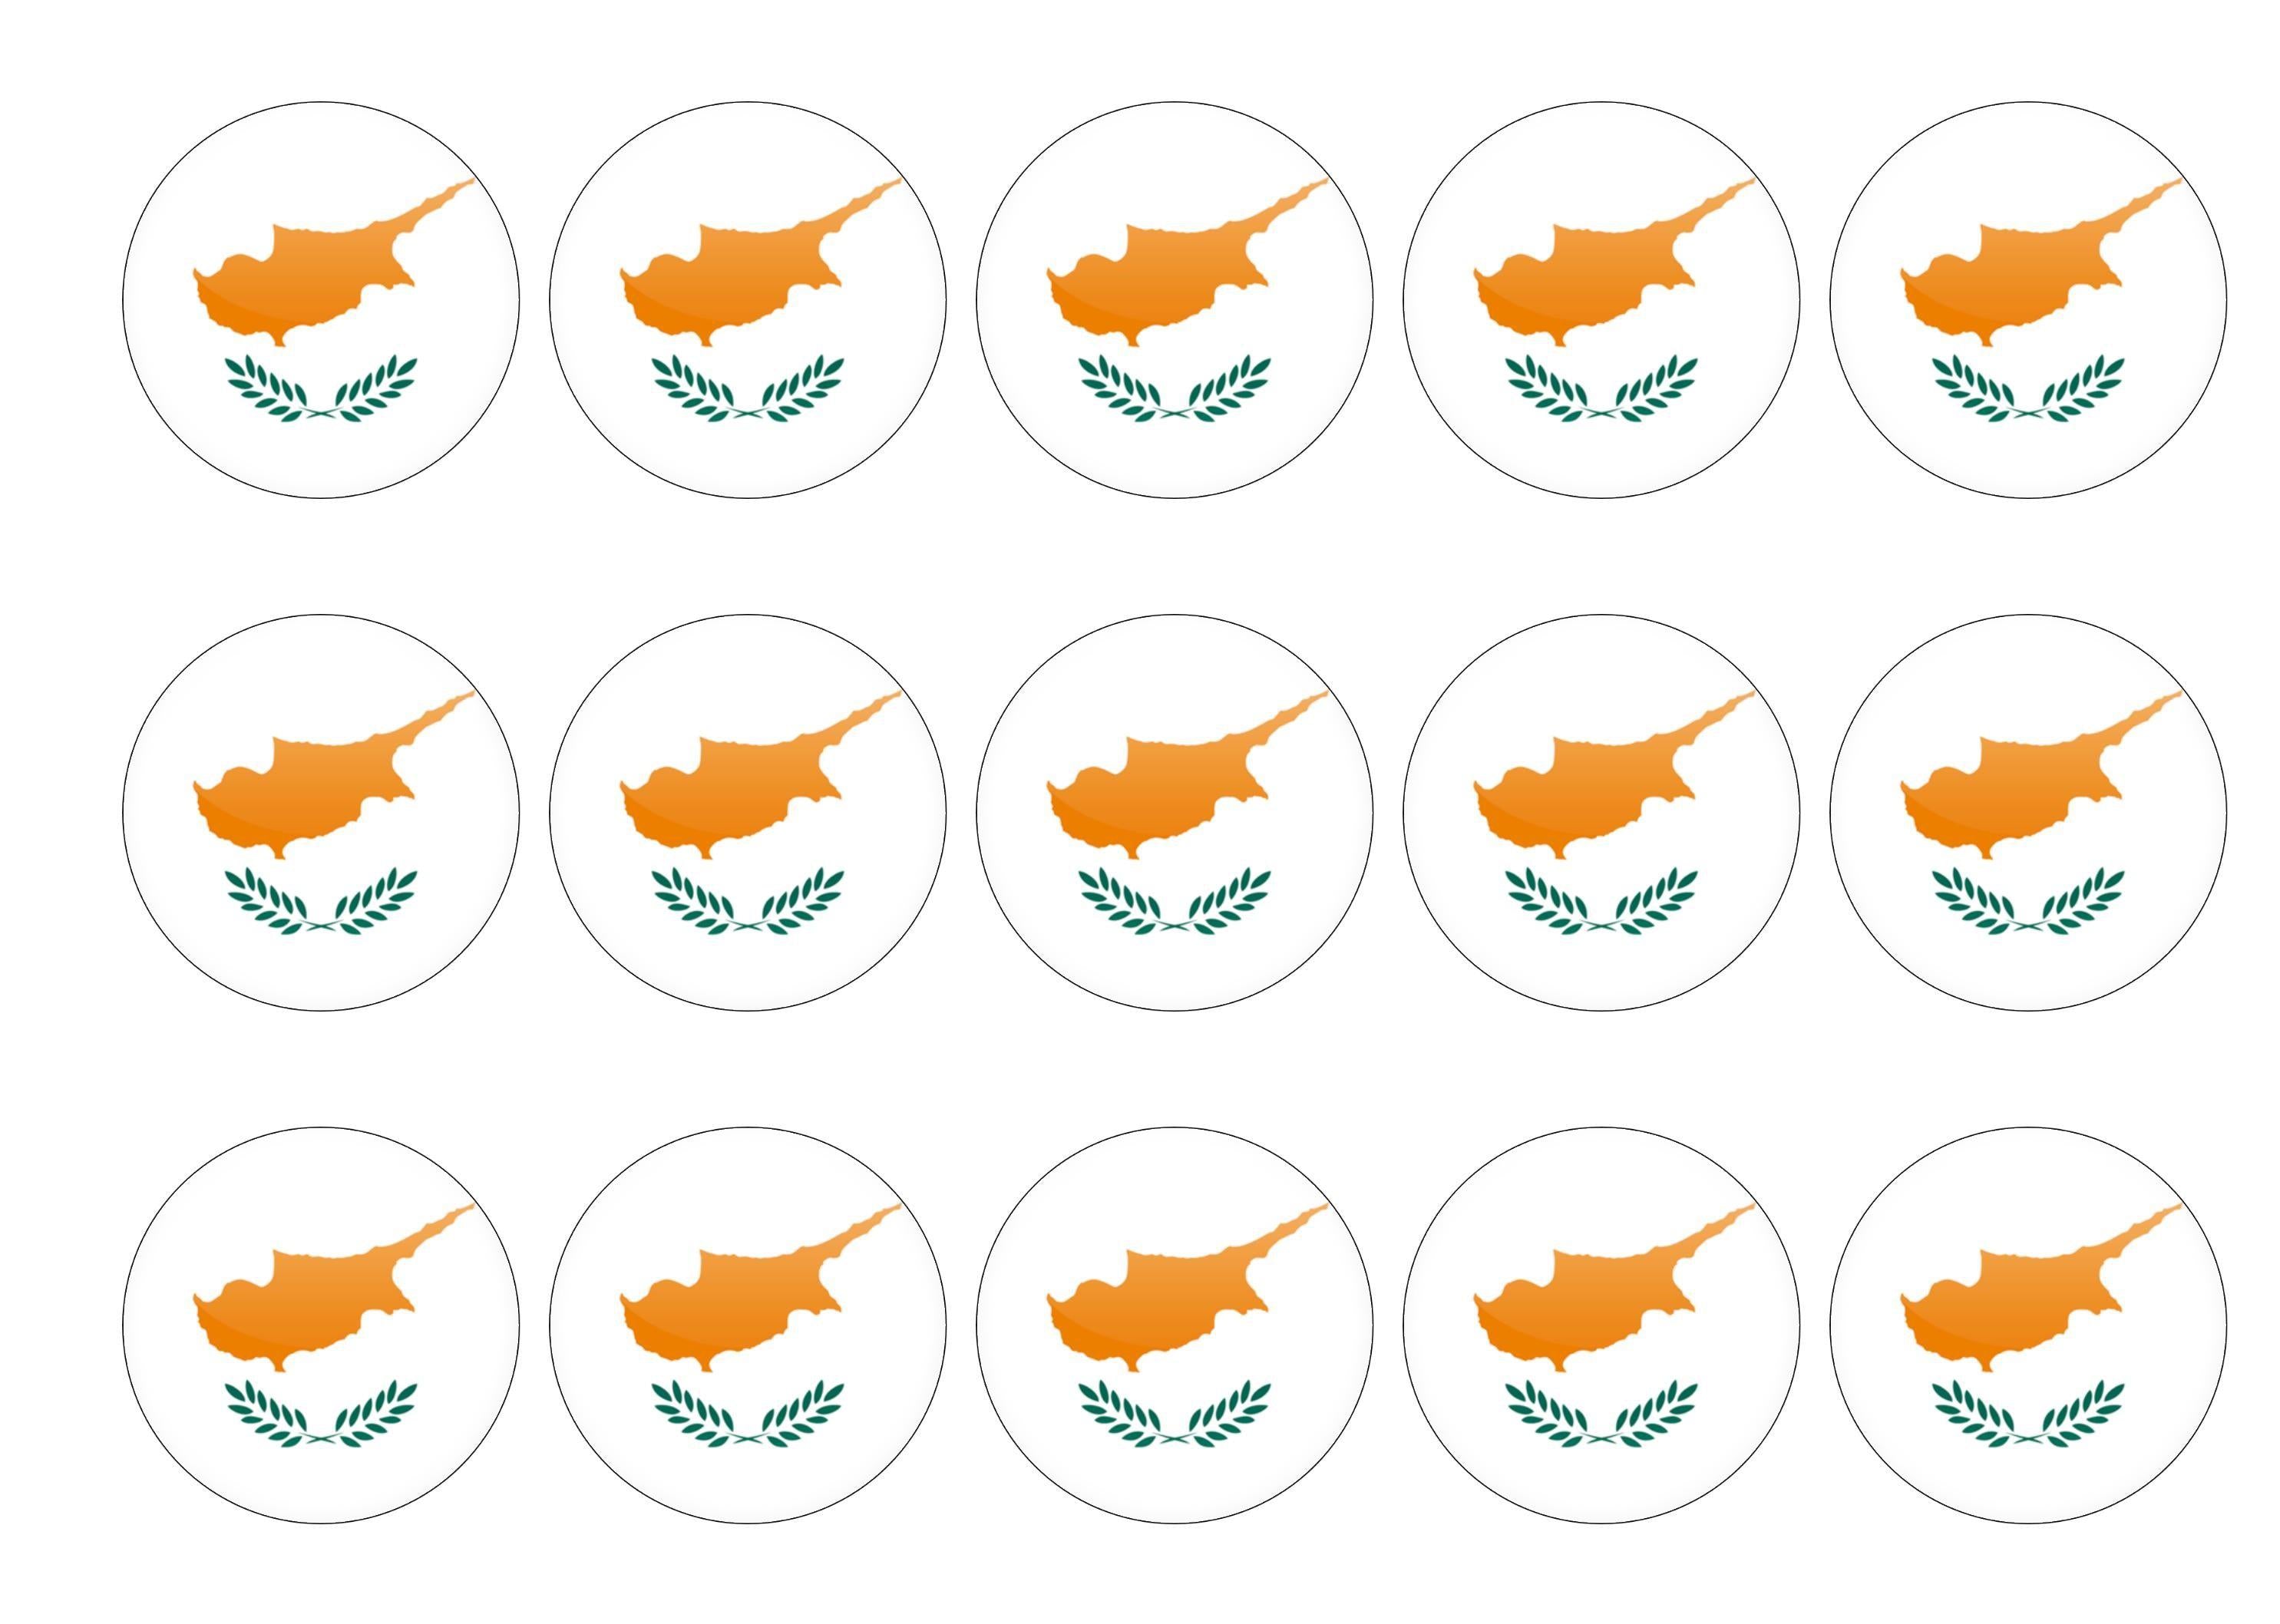 50 x 50mm printed edible cupcake toppers - Cyprus